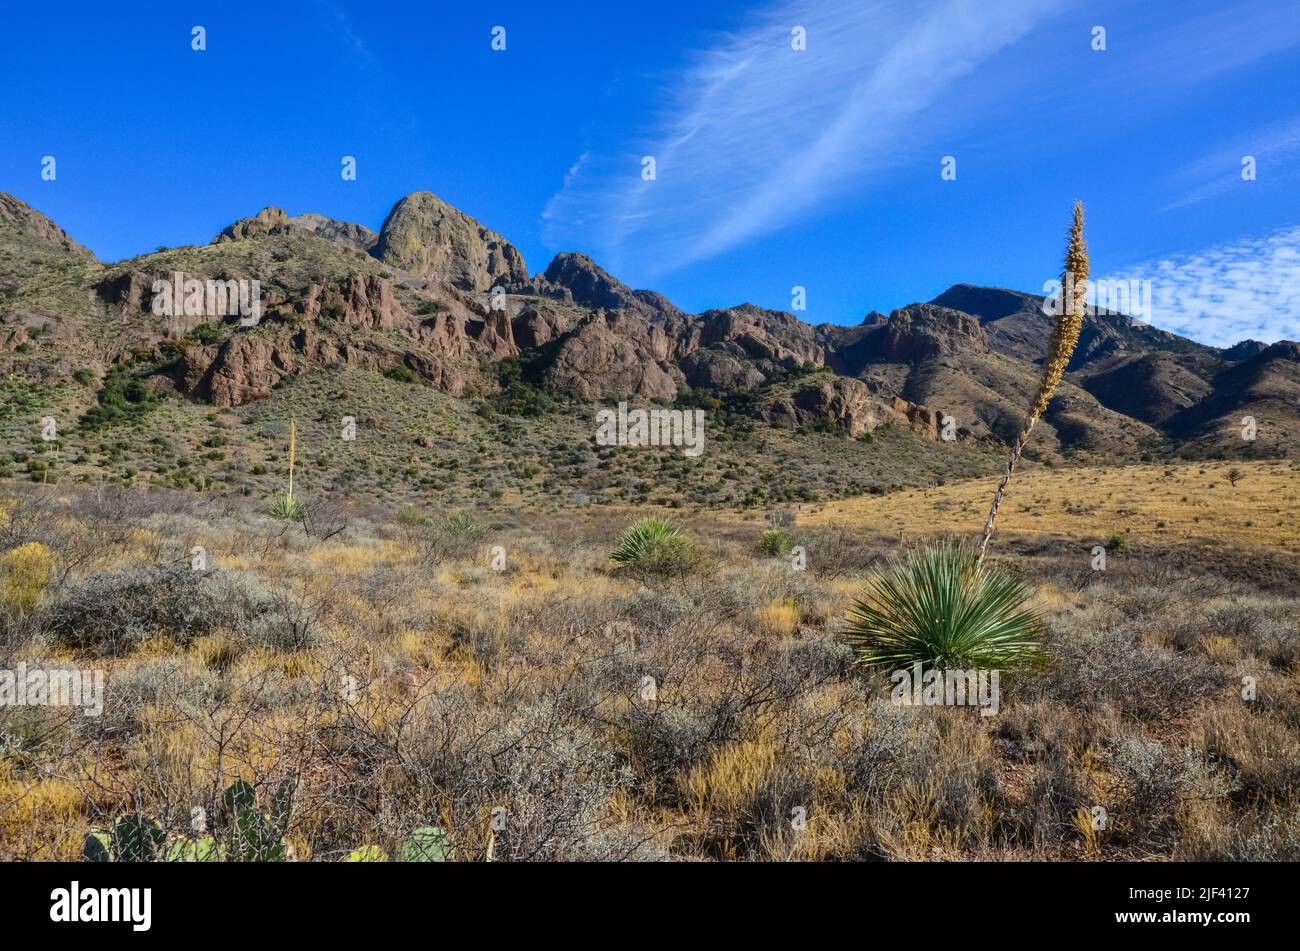 Mountain landscape with yucca, cacti and desert plants in 'Organ Mountains-Desert Peaks National Monument' in New Mexico, USA Stock Photo